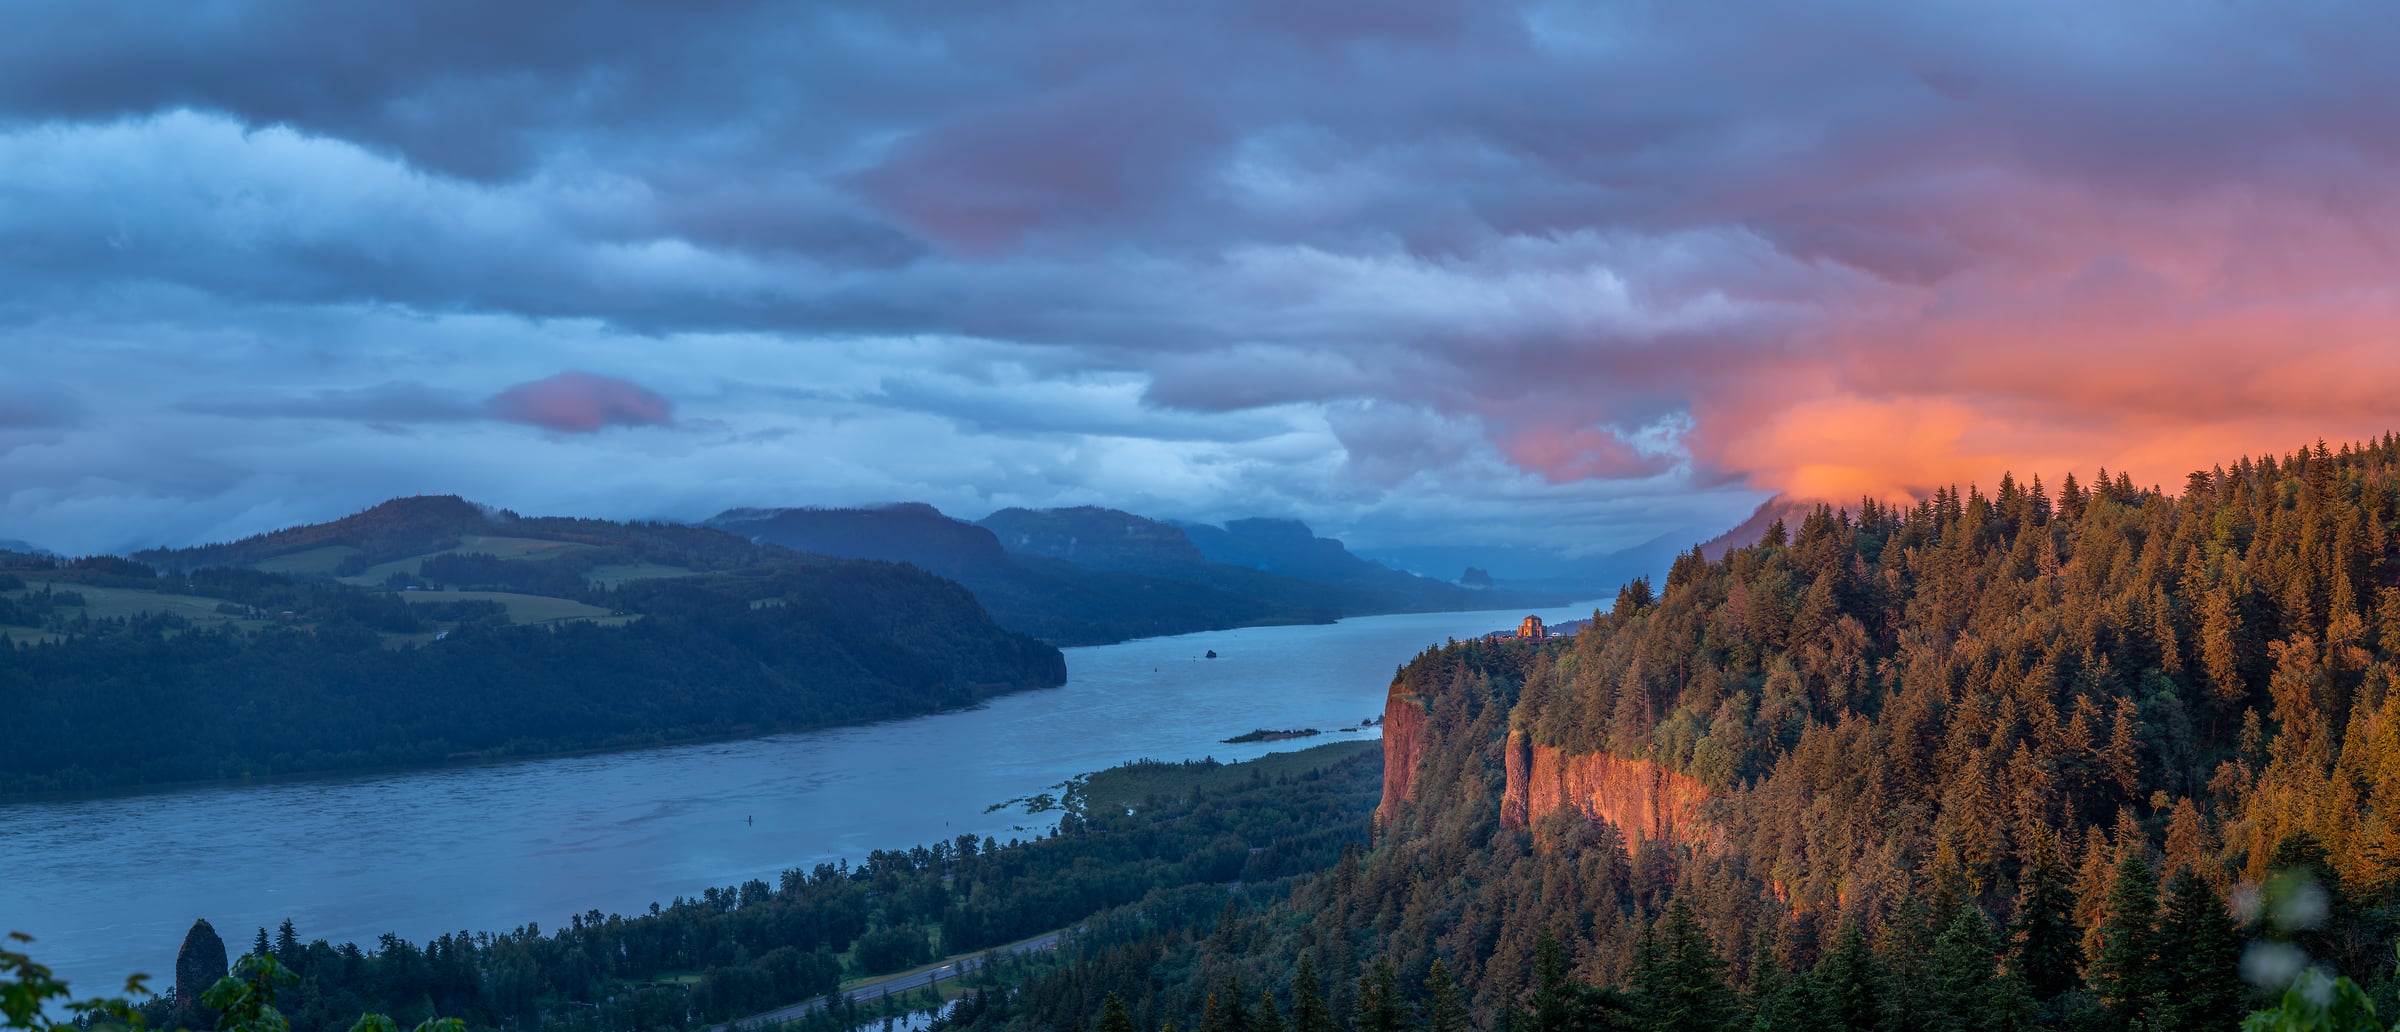 342 megapixels! A very high resolution, large-format VAST photo print of the Columbia River Gorge at sunset; landscape photograph created by Greg Probst in Columbia River Gorge National Scenic Area, Washington and Oregon.